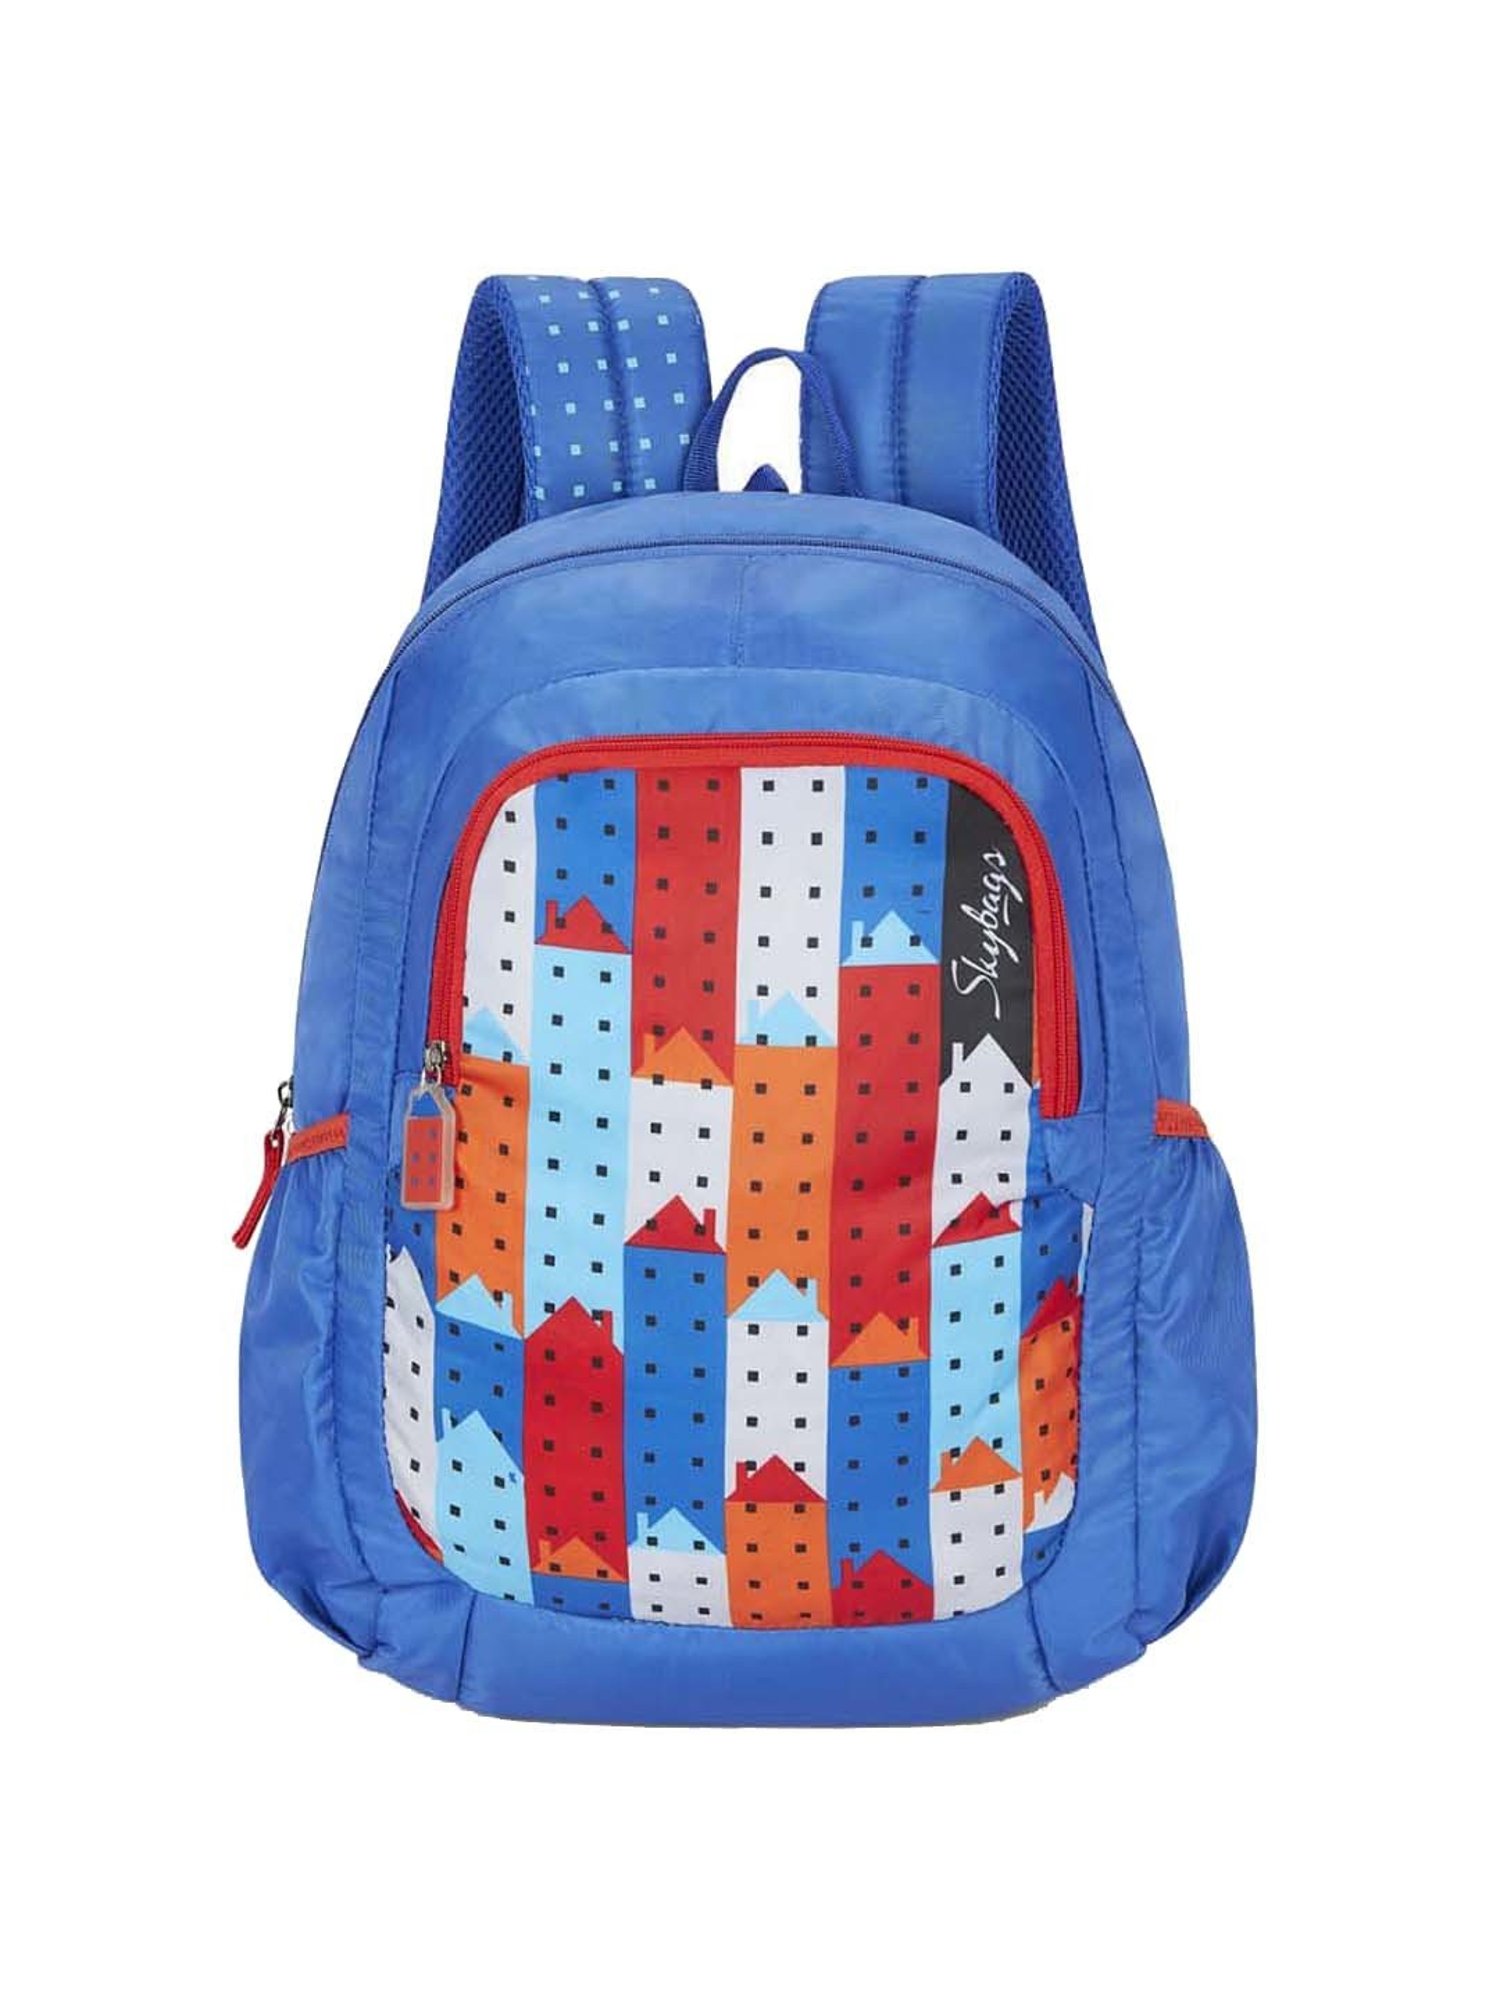 Skybags Backpacks : Buy Skybags Astro 05 Backpack Blue Online | Nykaa  Fashion